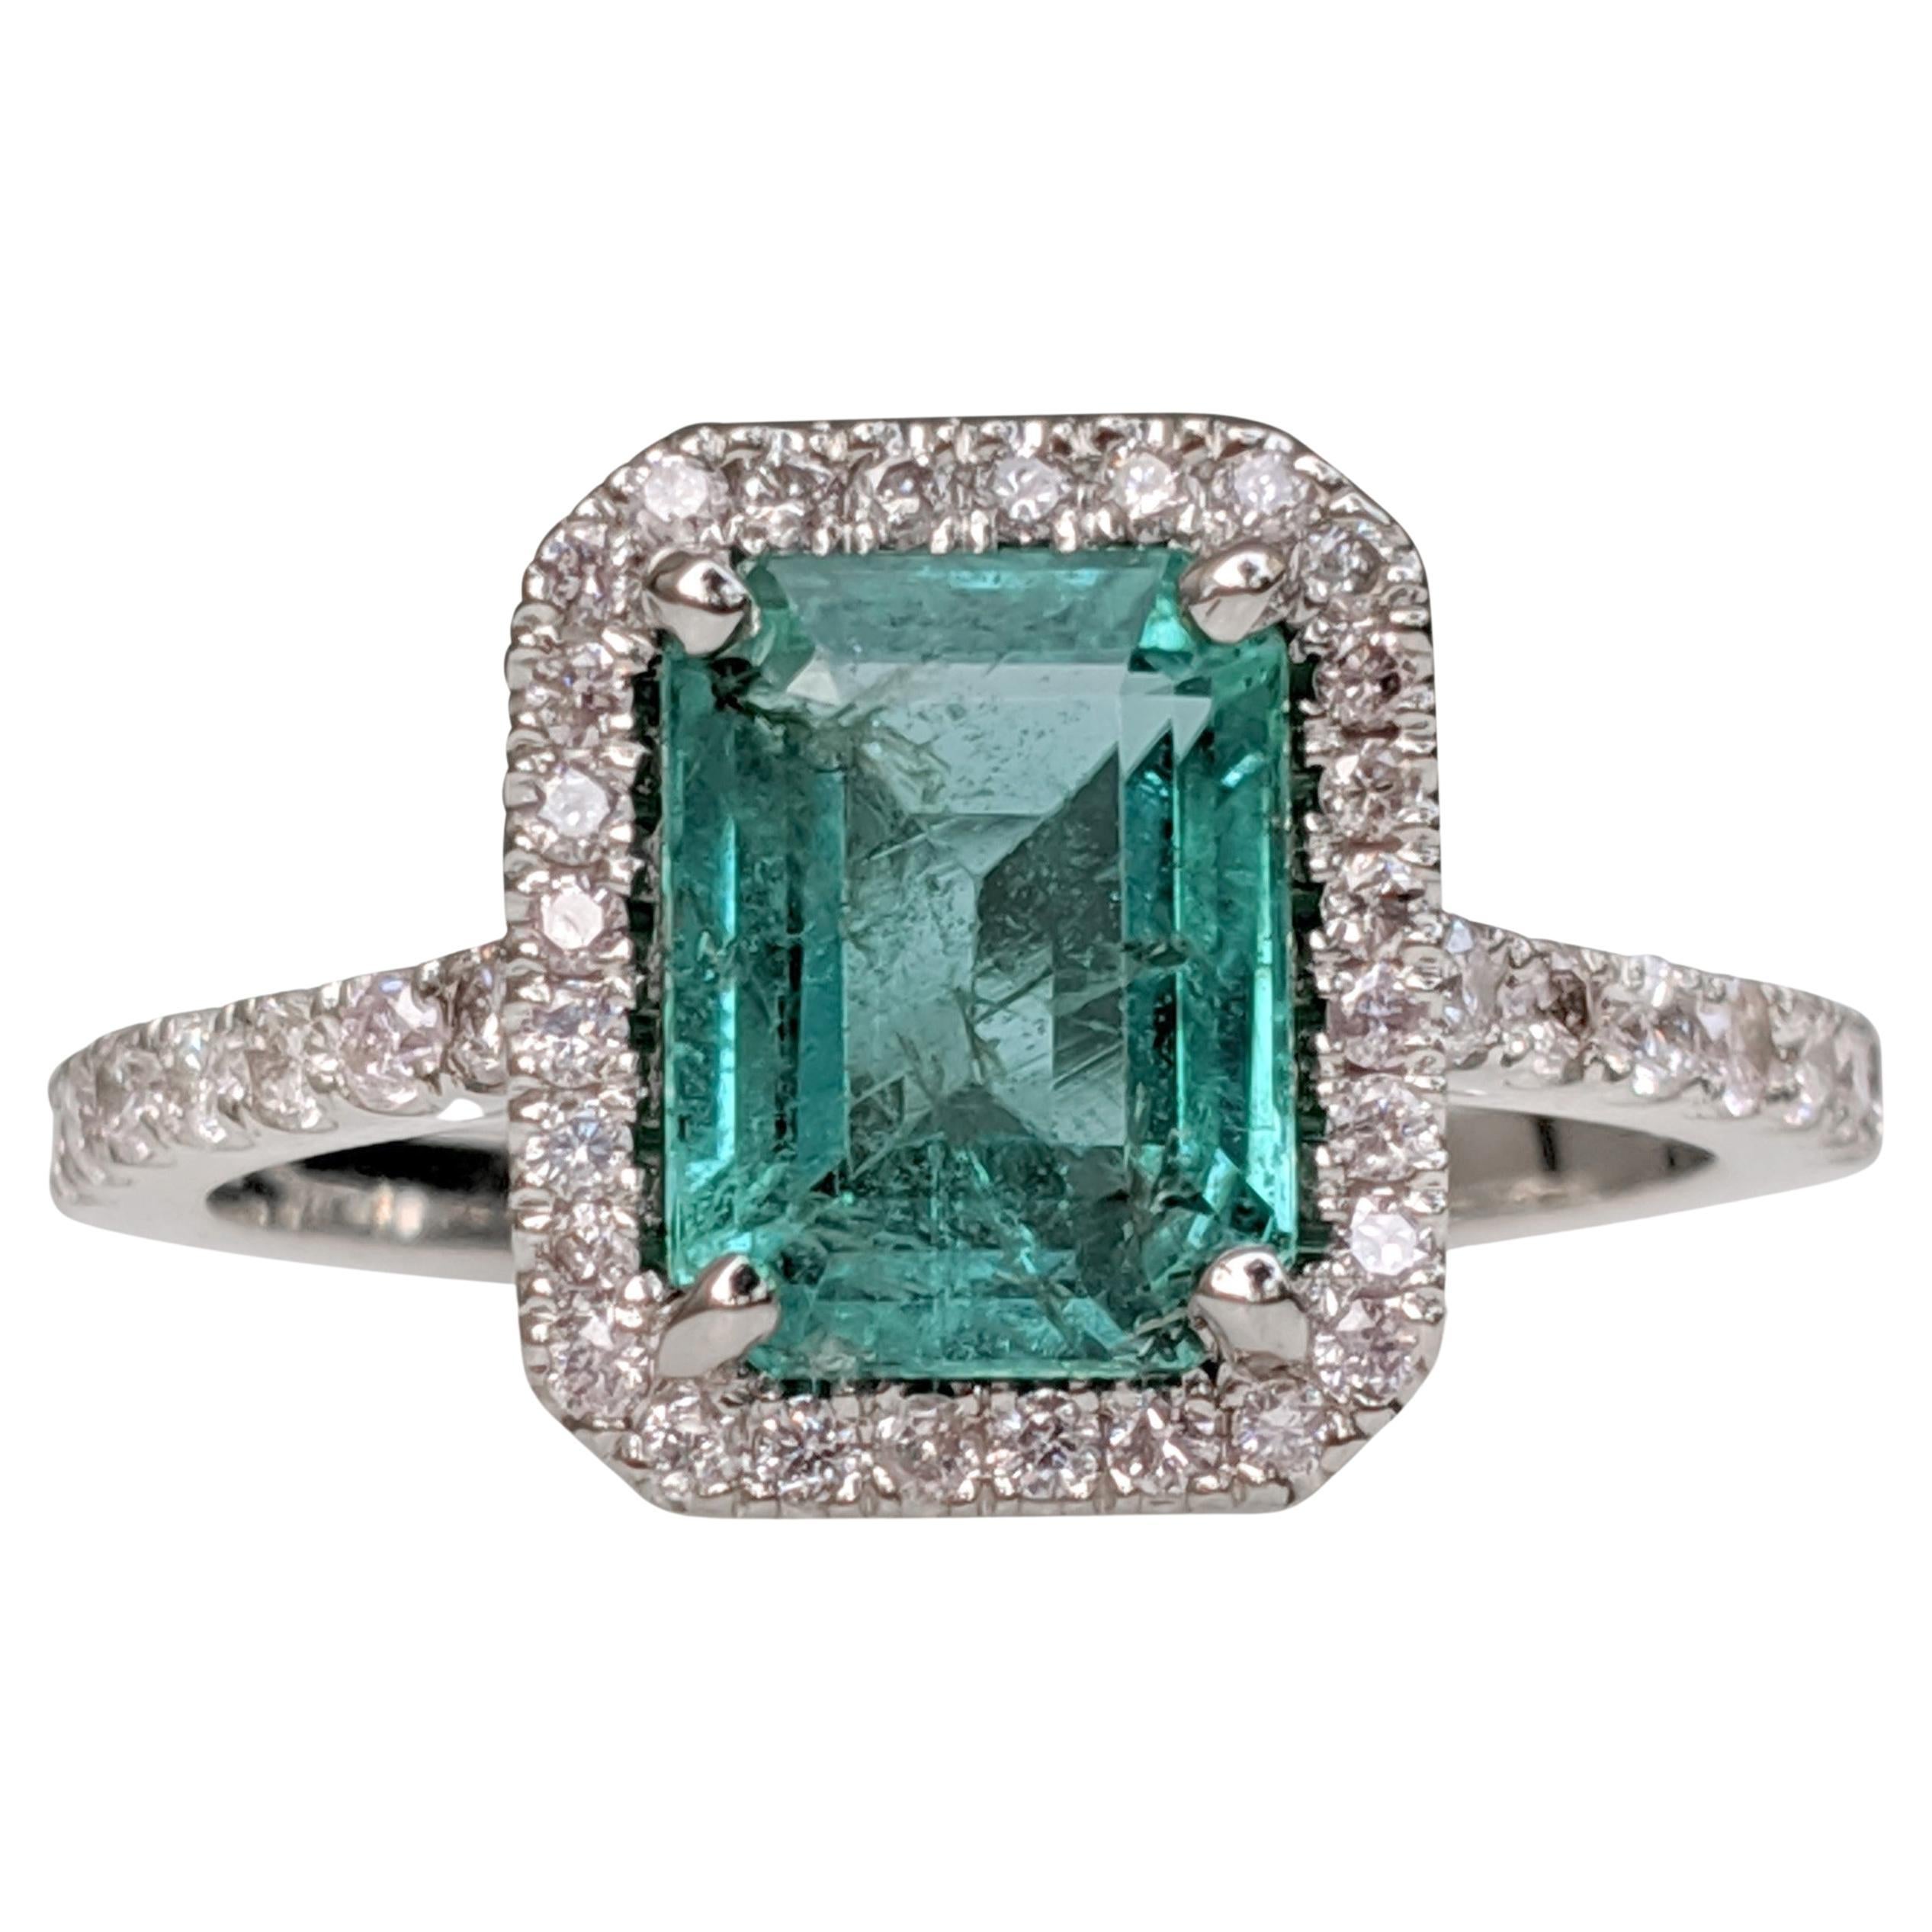 Ring can be resized free of charge prior to shipping out.
Ring Size: 58.5 EU

Center Natural Emerald:
Weight: 2.05 ct
Colour: Green
Shape: Emerald
Minor clarity enhancement

Side Stone Diamonds:
Weight: 0.41 ct / 42 stones
Color: Light Pink -